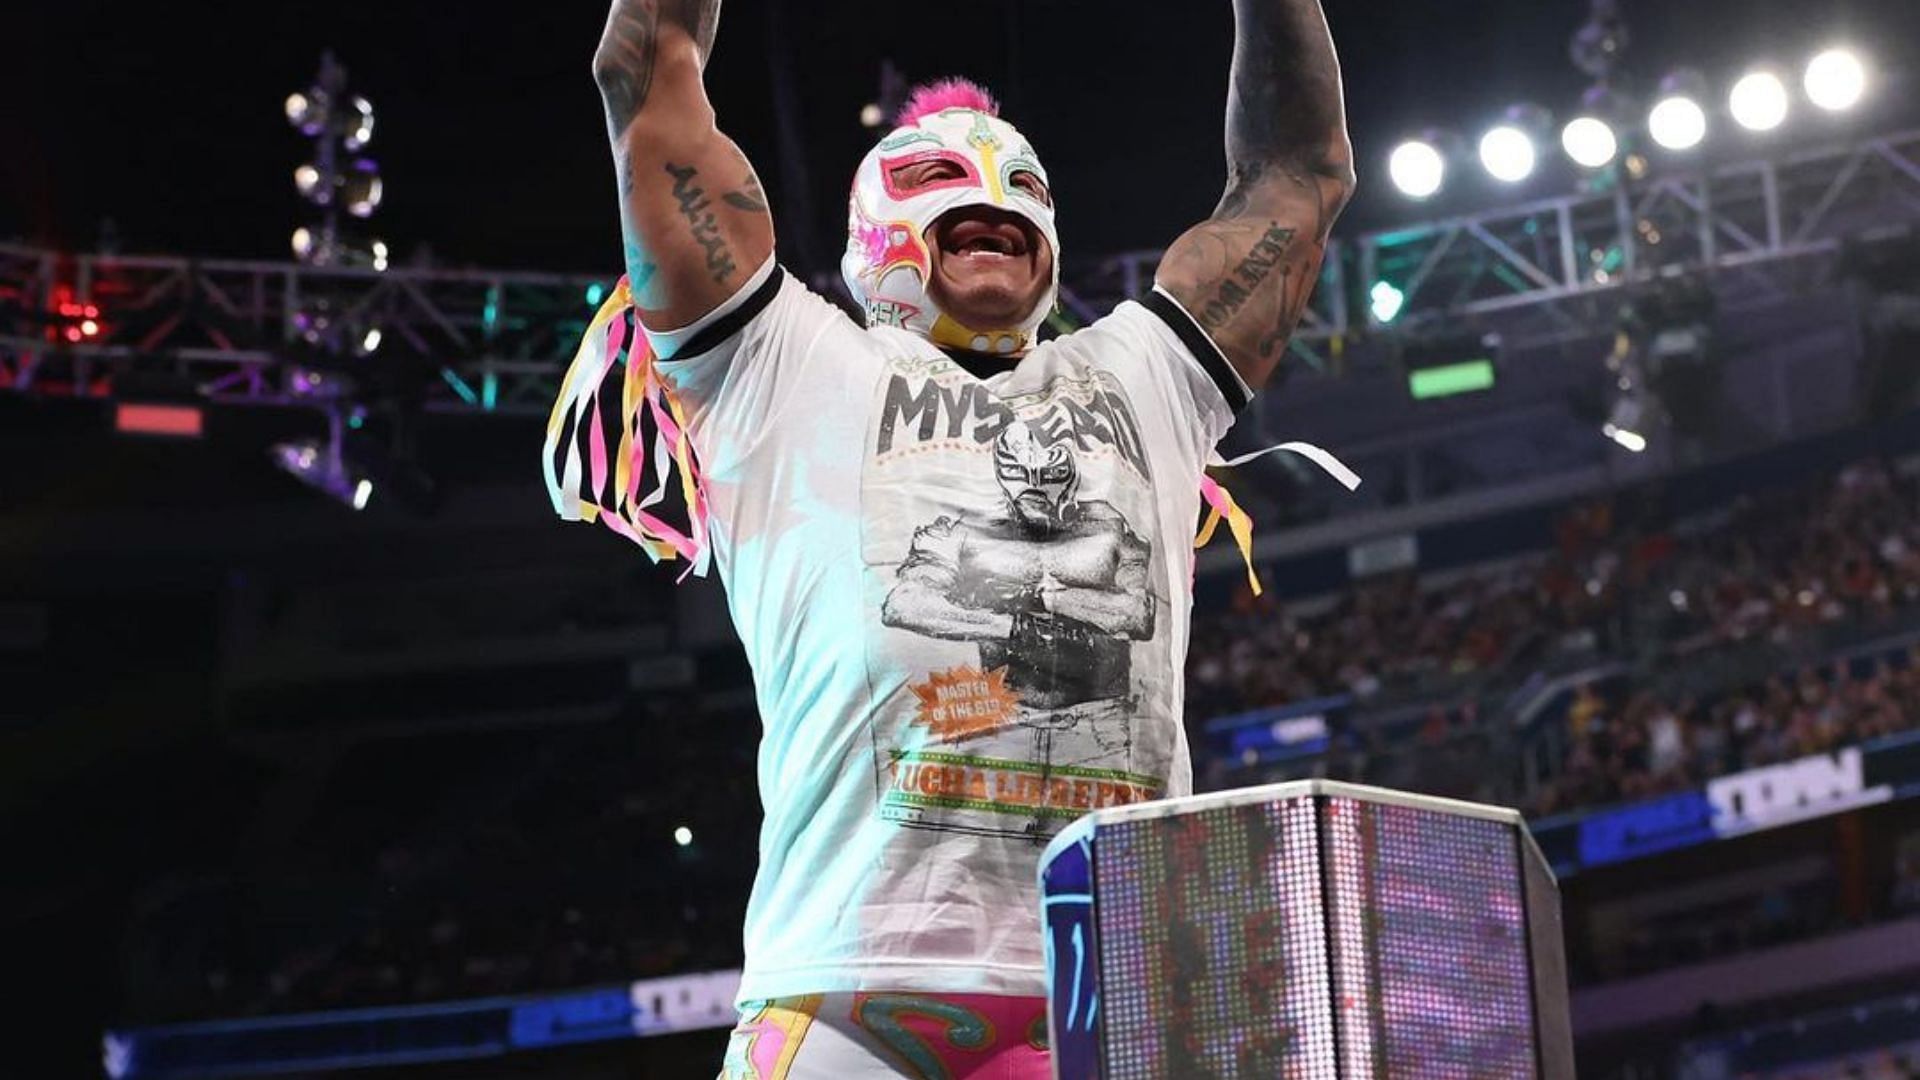 Latino World Order is led by WWE Hall of Famer Rey Mysterio